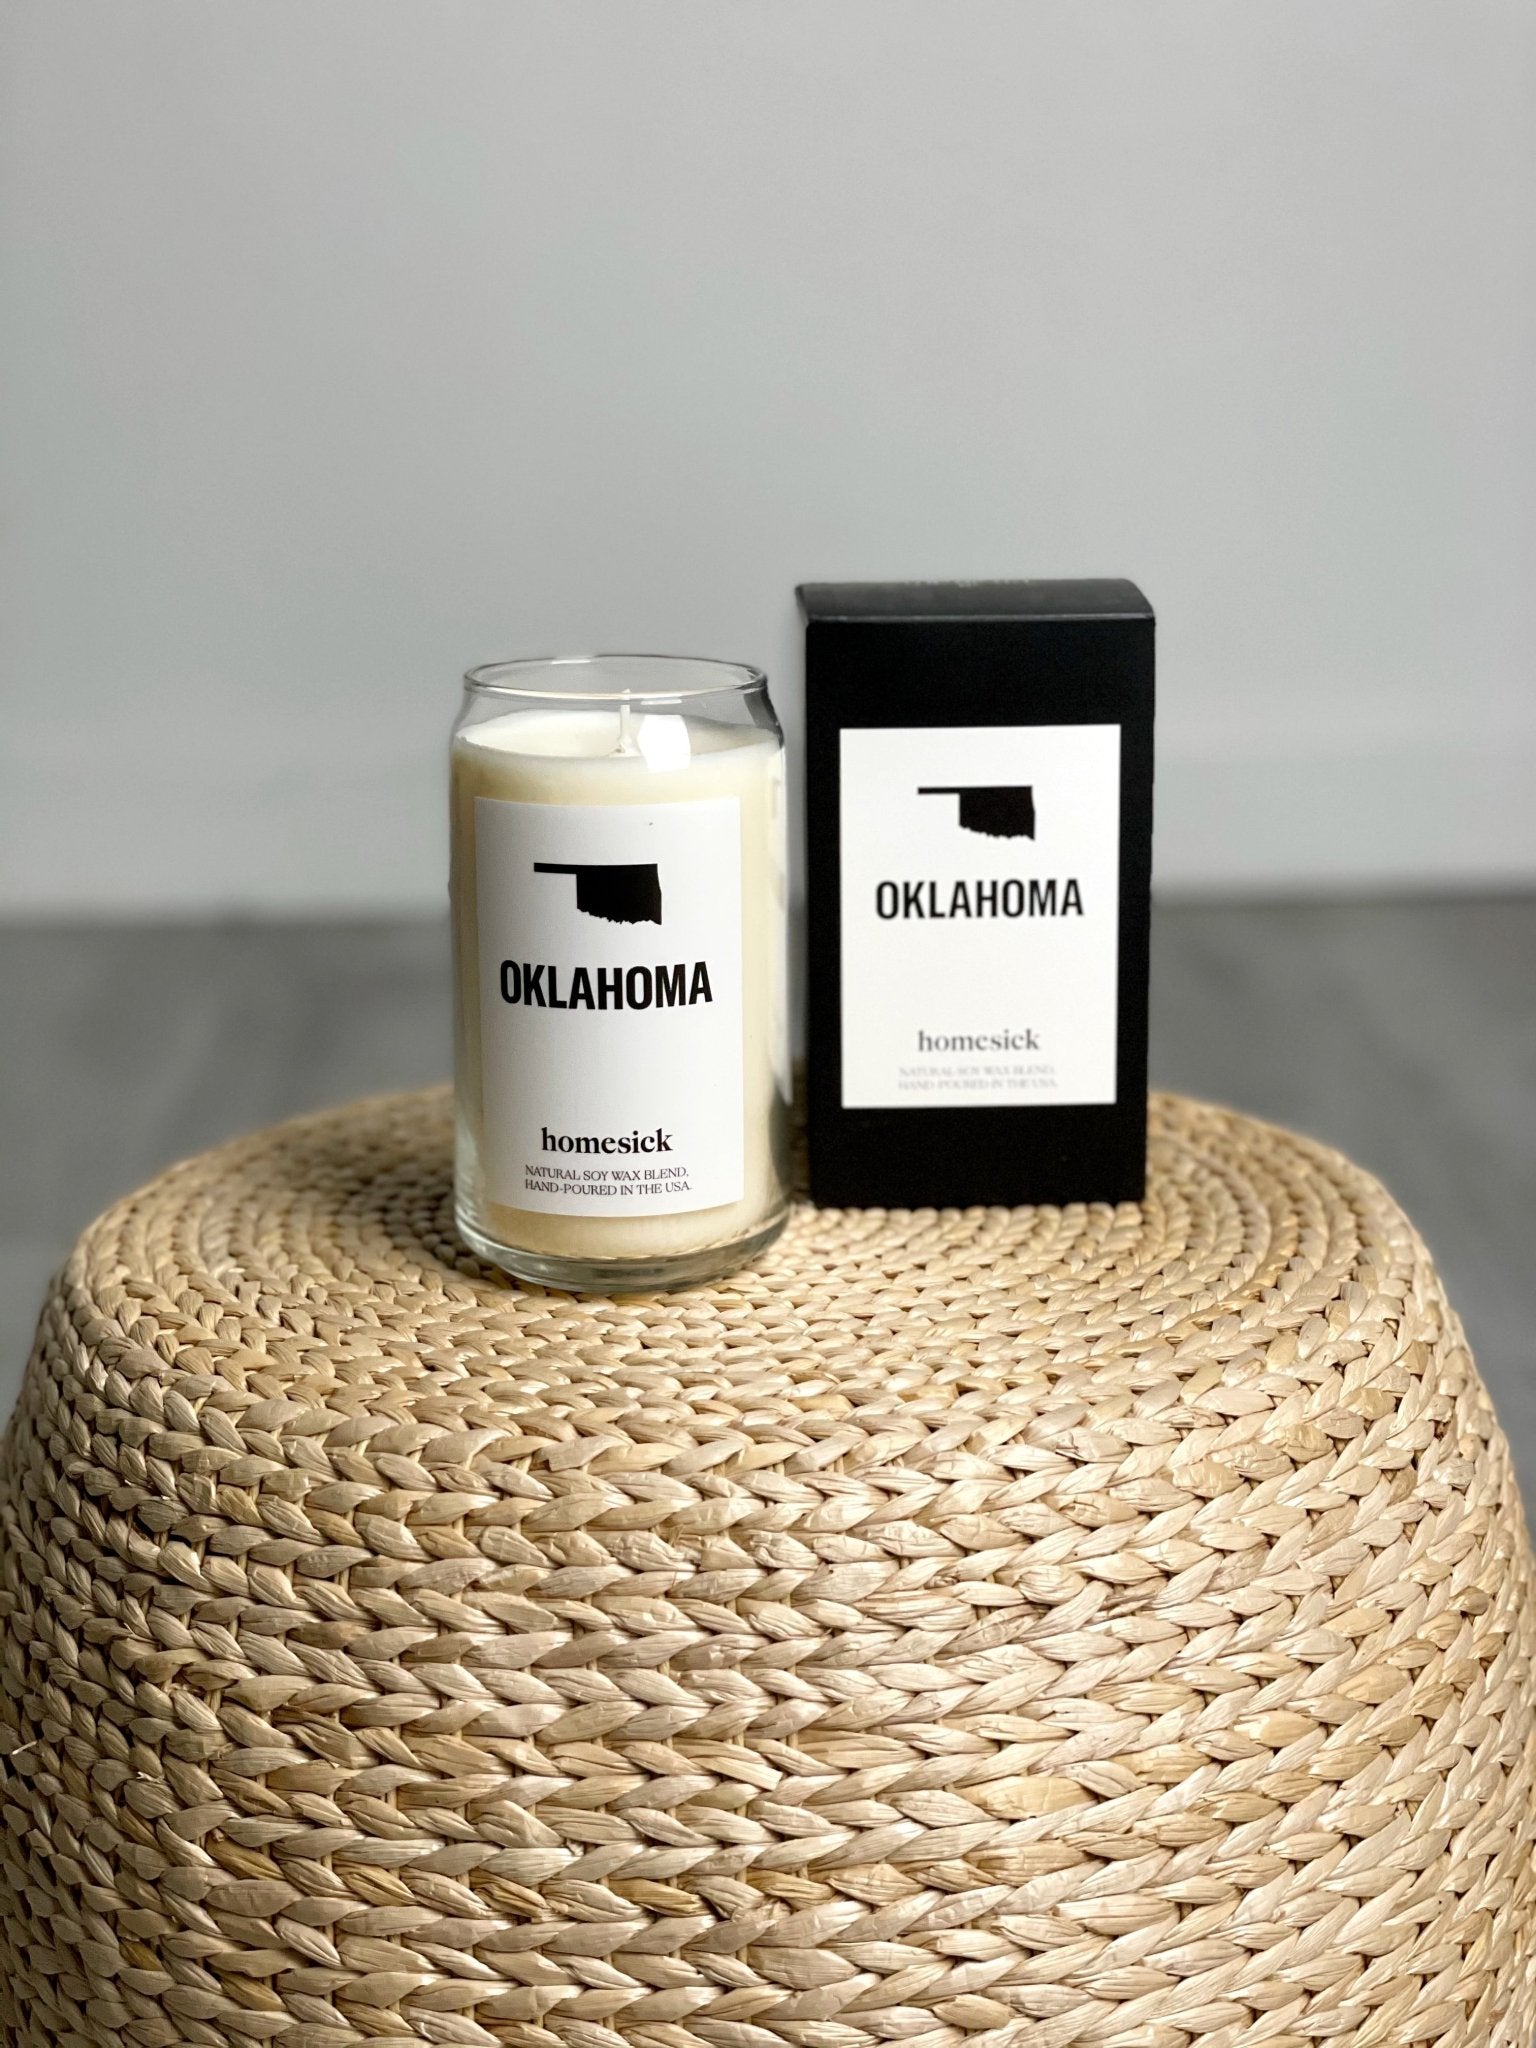 Homesick Oklahoma candle - Trendy Candles at Lush Fashion Lounge Boutique in Oklahoma City